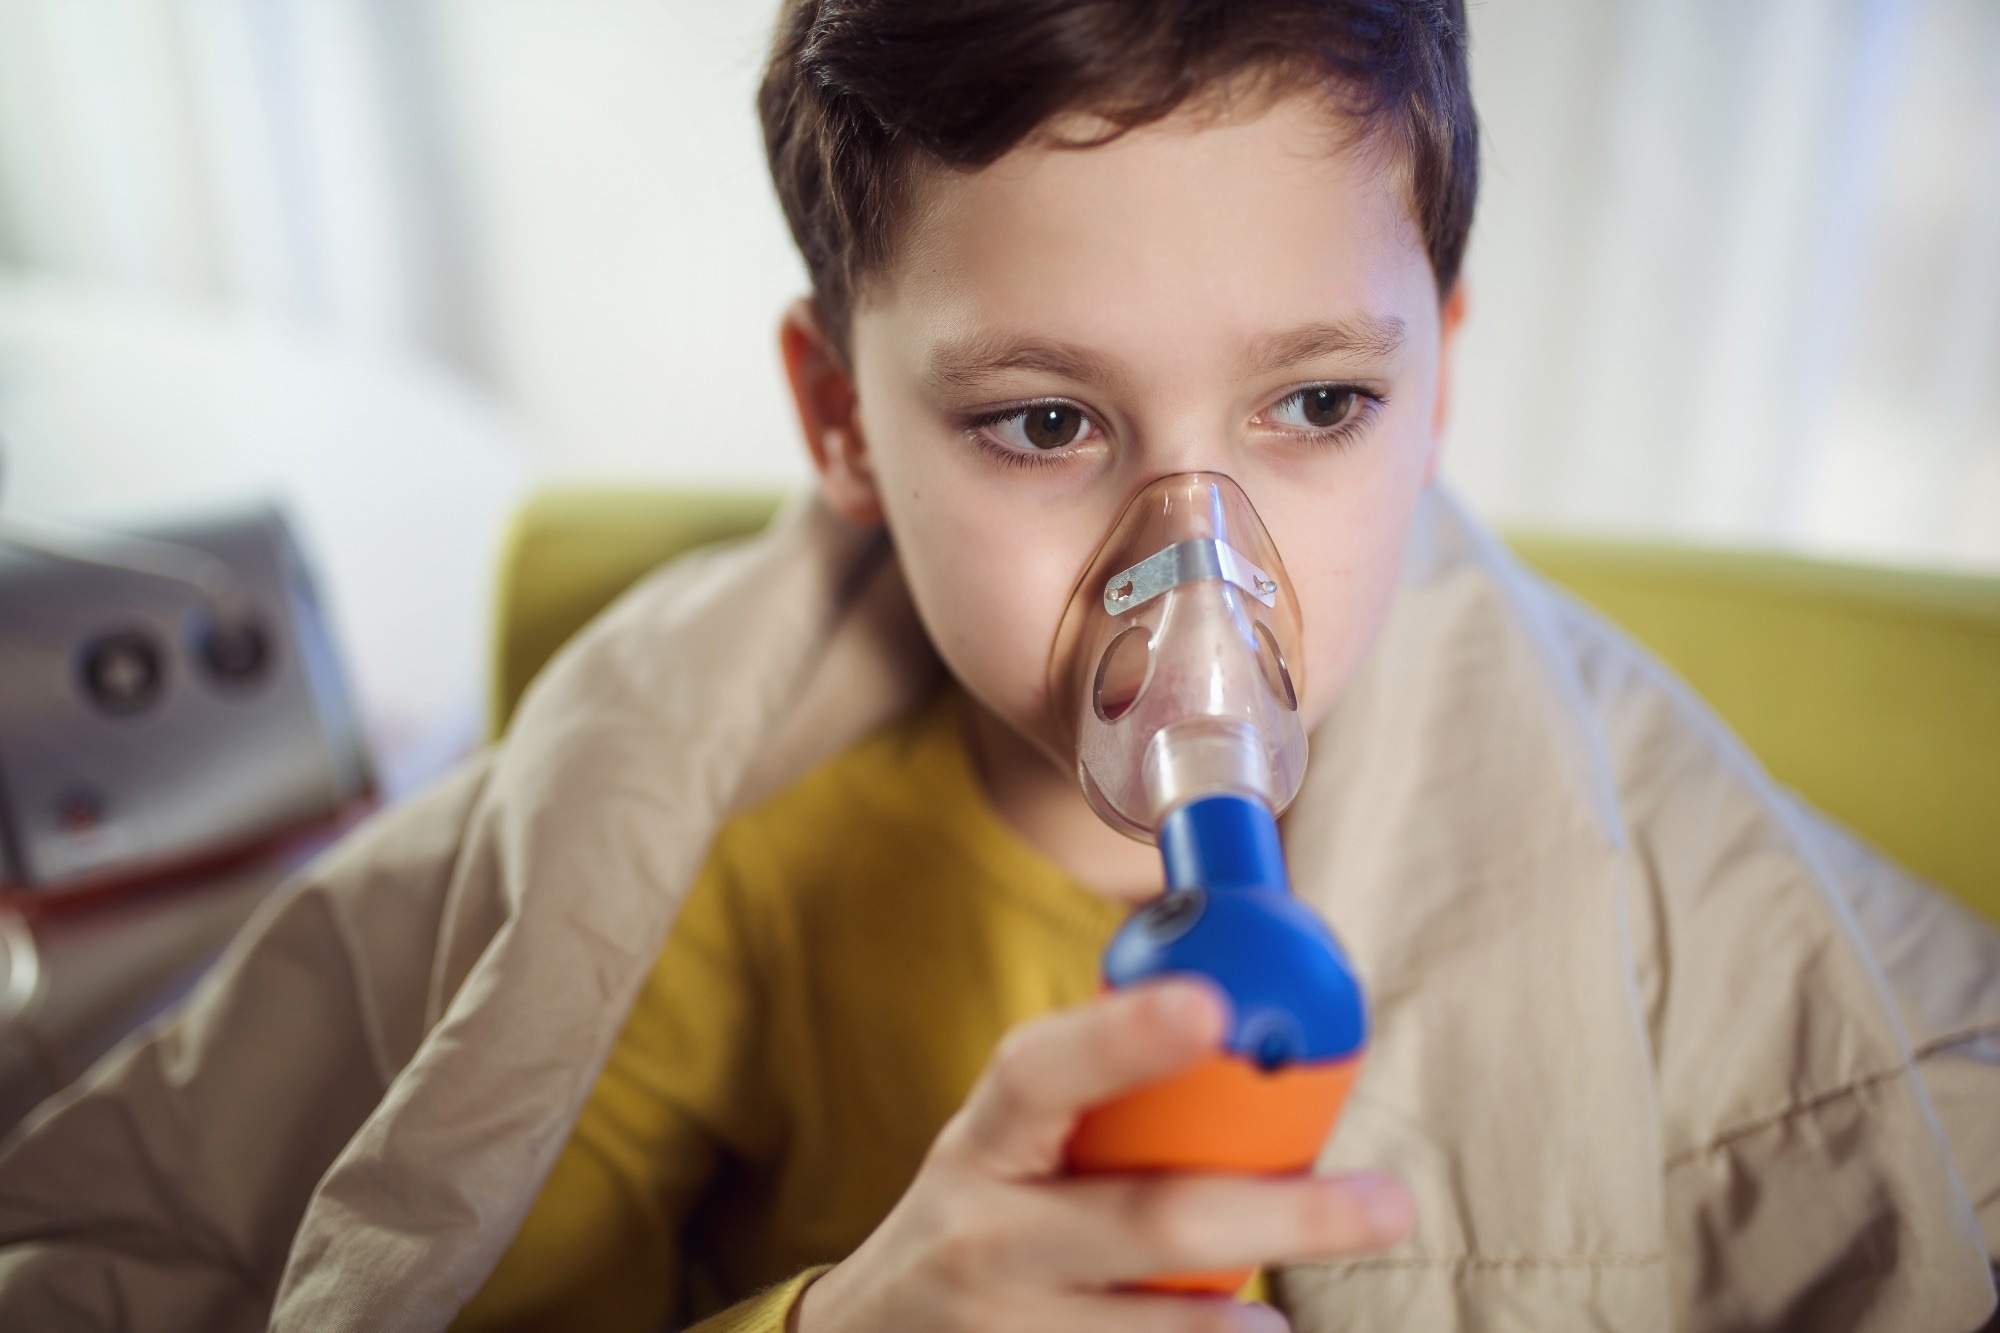 Study: A surge in human metapneumovirus paediatric respiratory admissions in Western Australia following the reduction of SARS-CoV-2 non-pharmaceutical interventions. Image Credit: adriaticfoto / Shutterstock.com